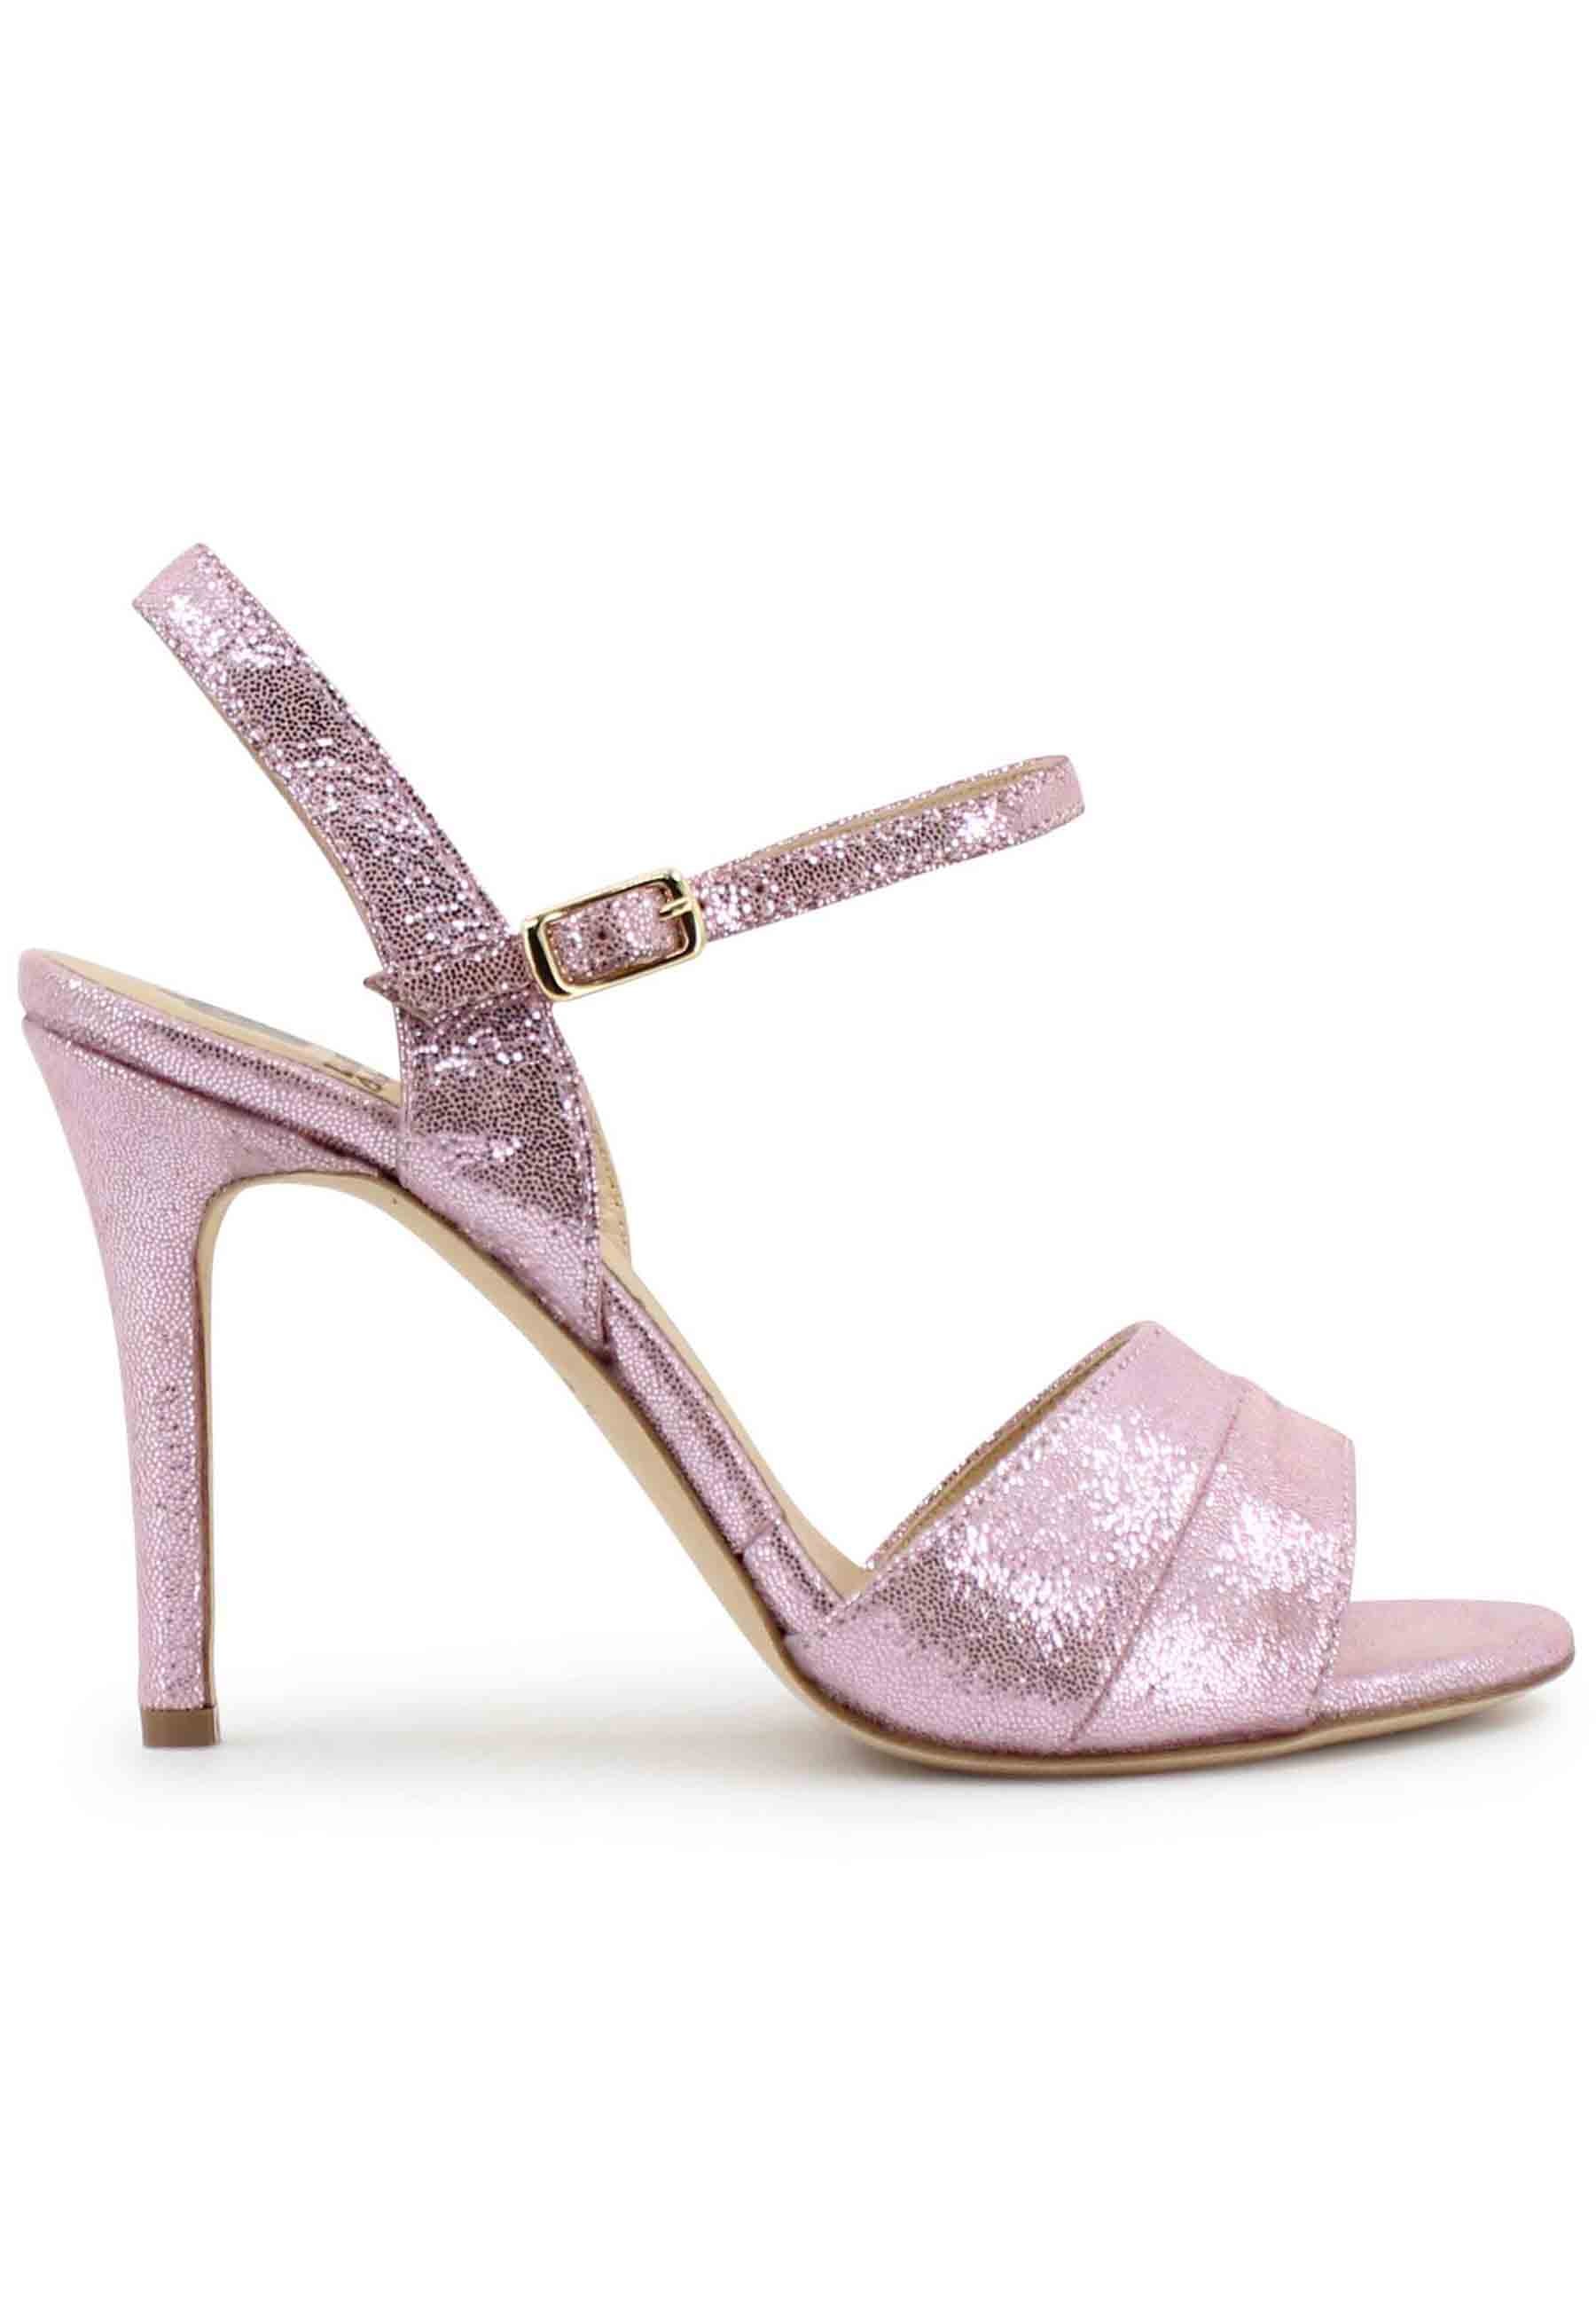 Women's sandals in pink laminated leather with high heel and ankle strap